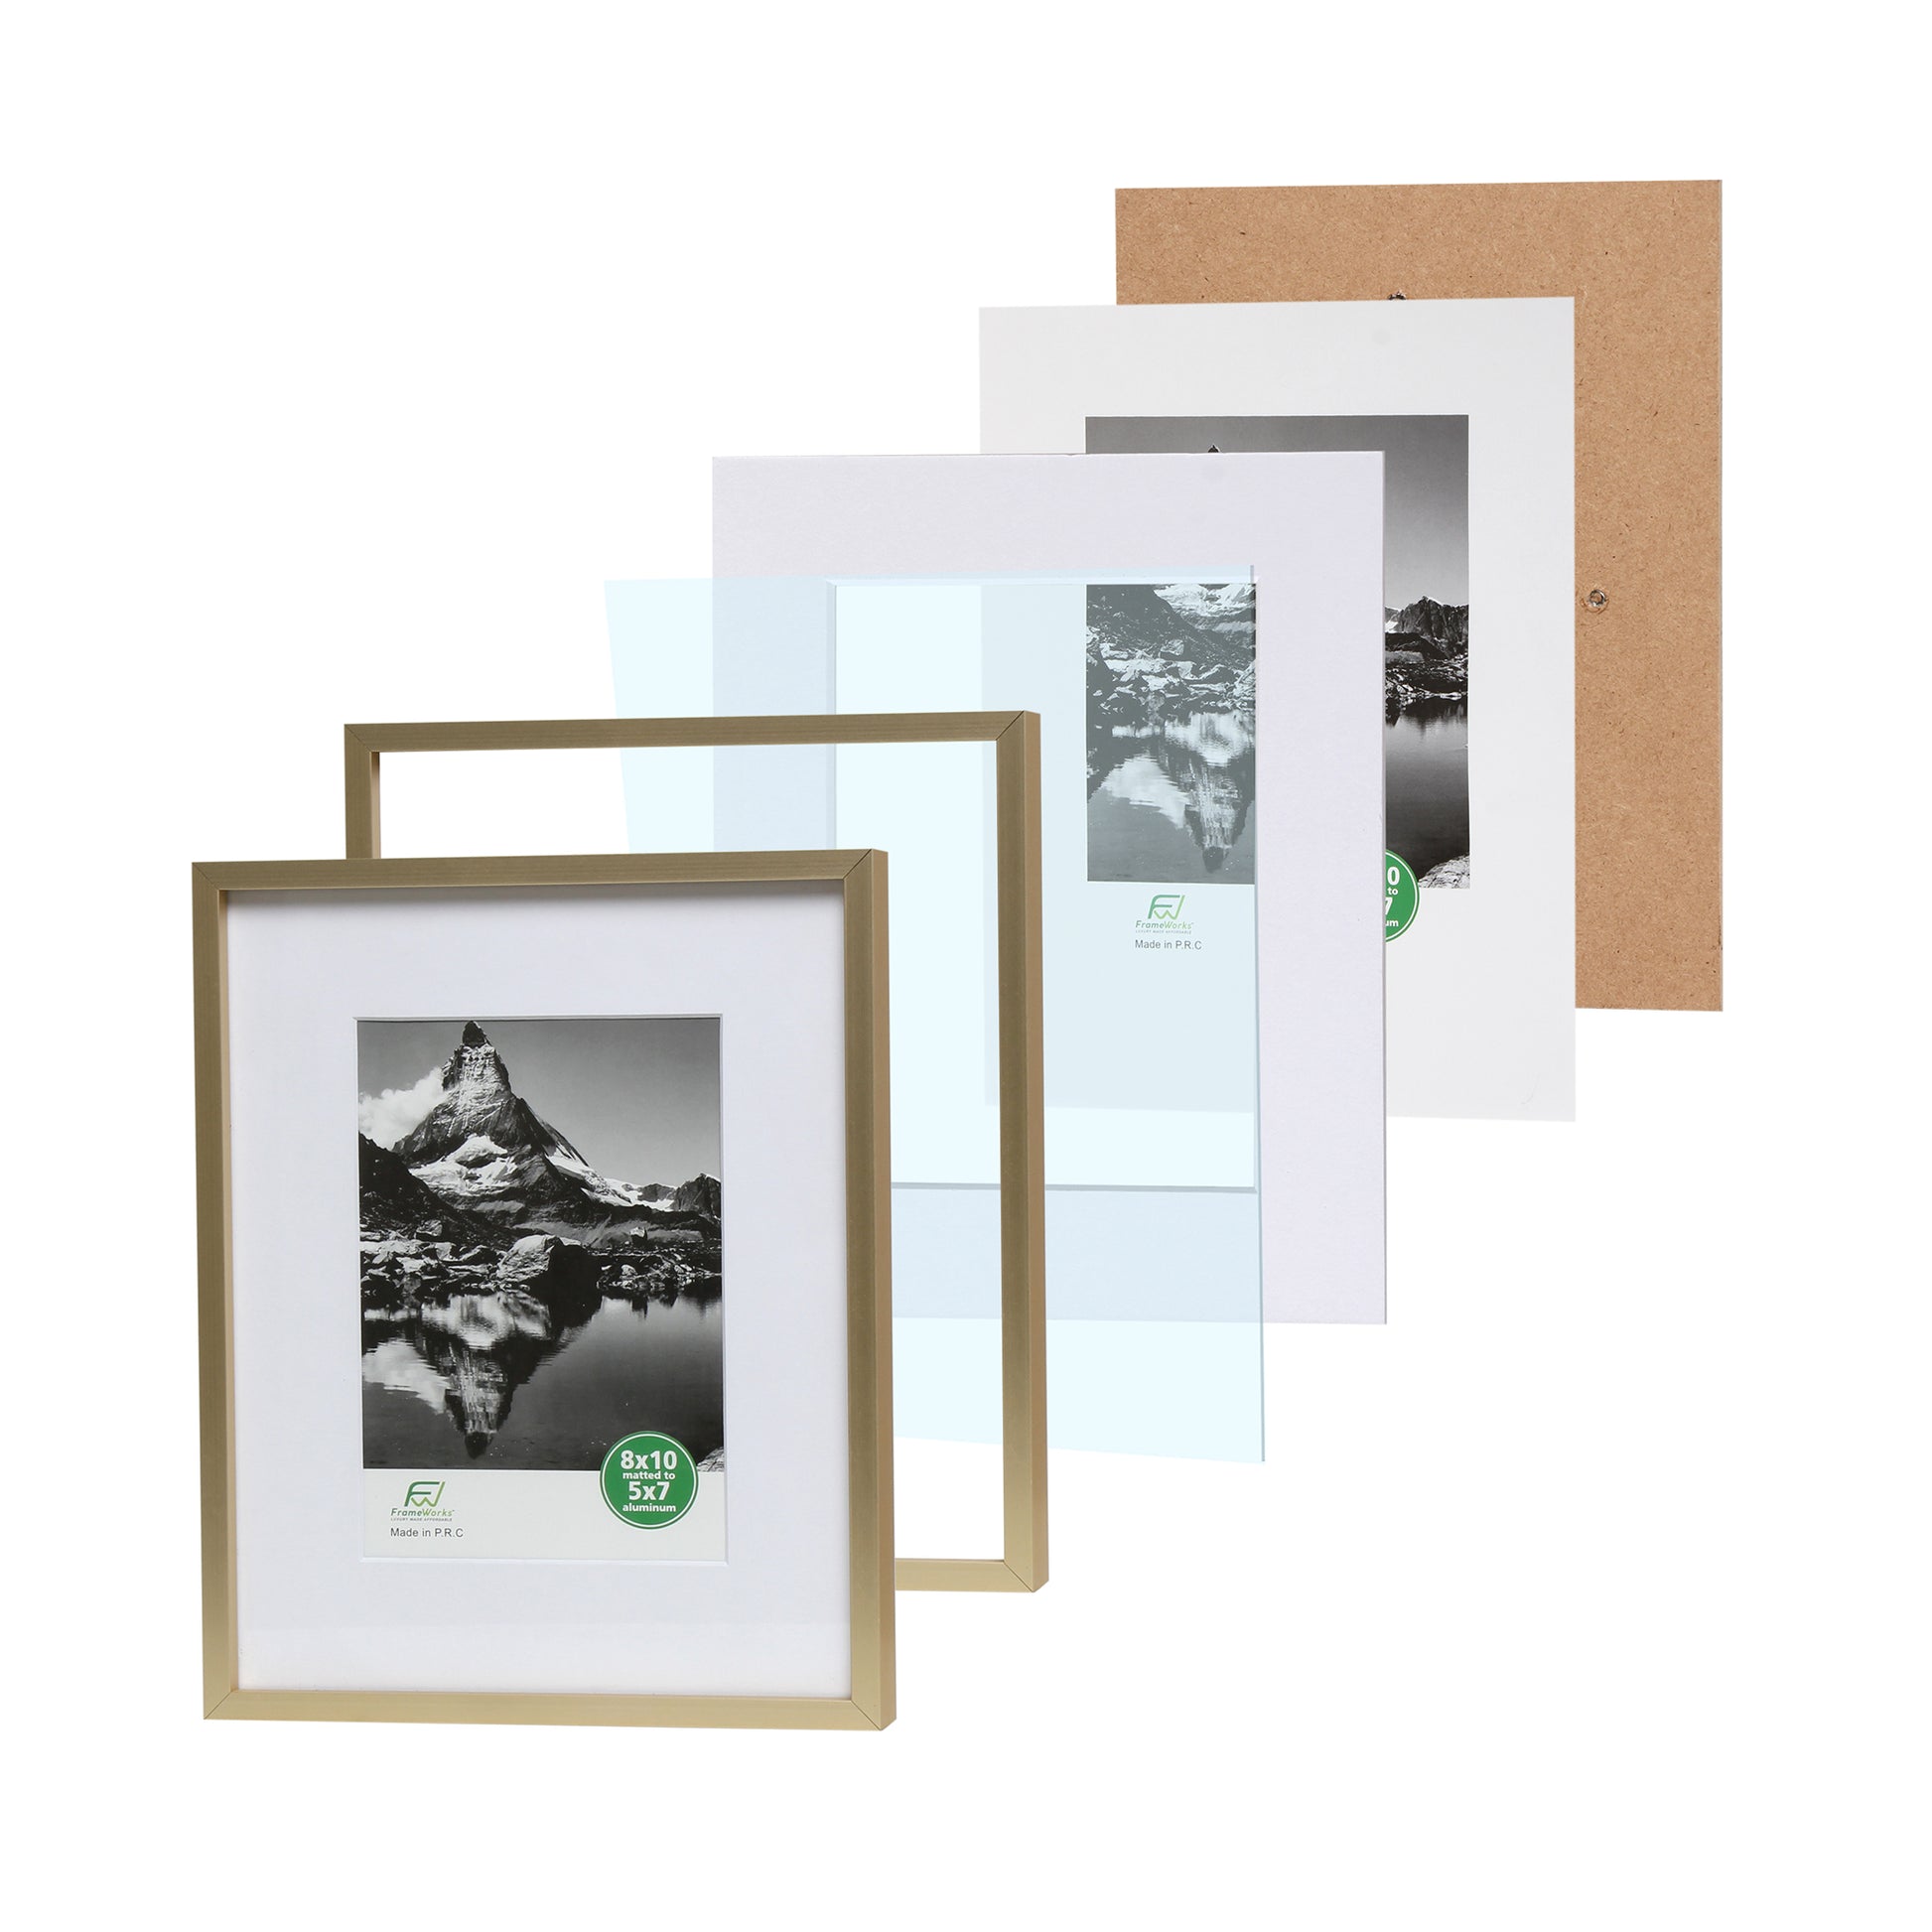 8 x 10 Deluxe Brass Gold Aluminum Contemporary Picture Frame, 5